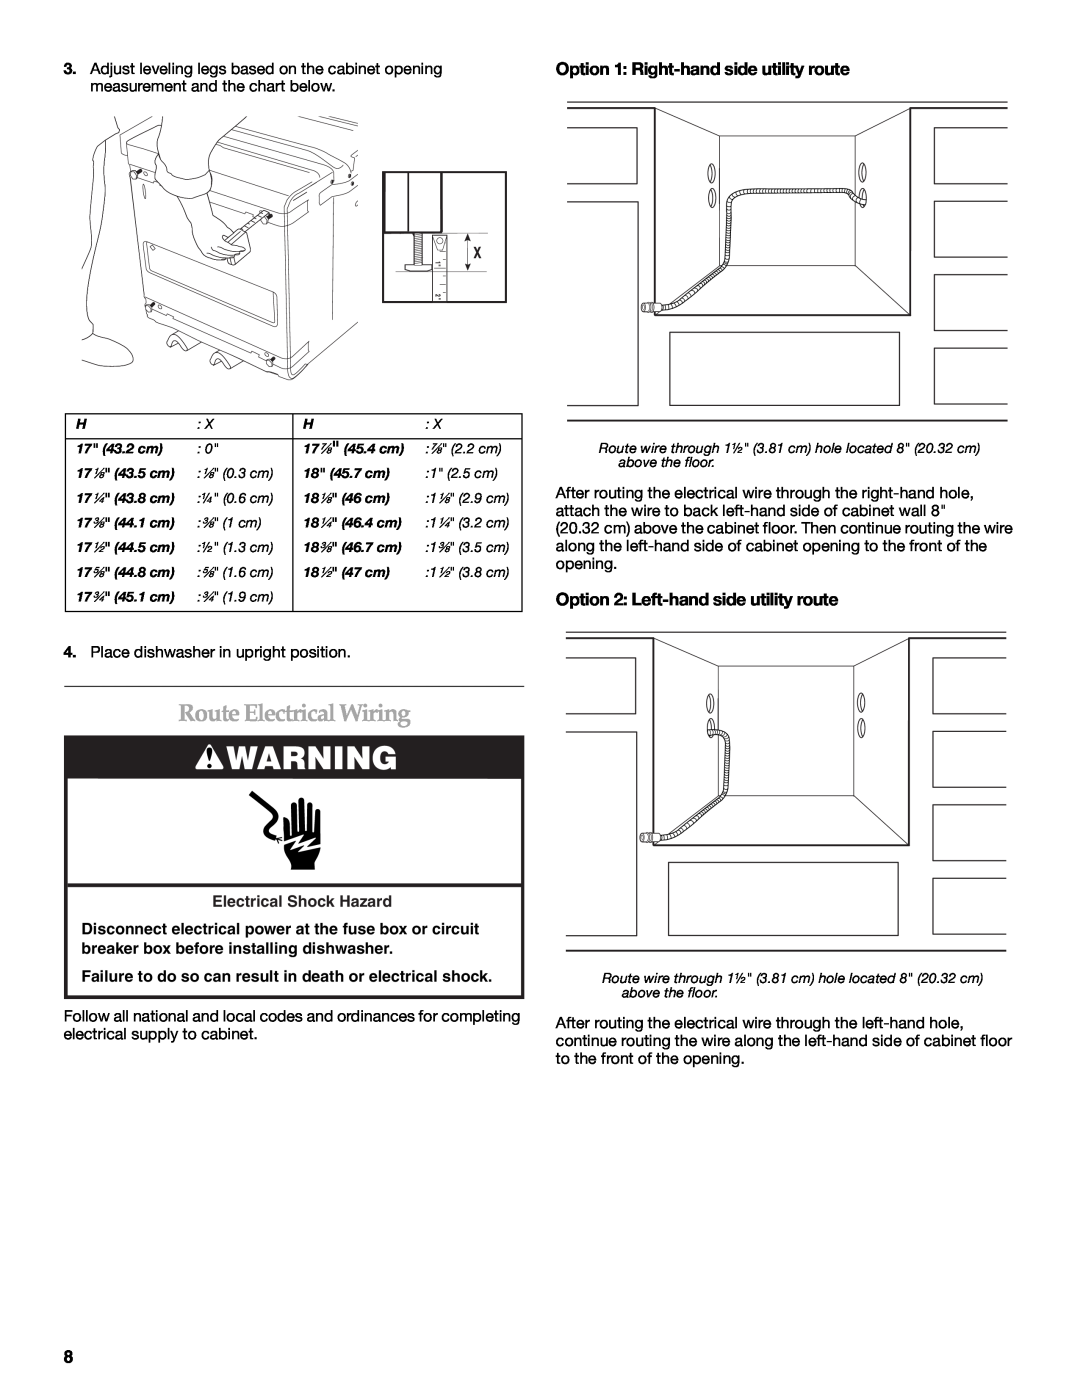 KitchenAid KUDD03STBL Route Electrical Wiring, Option 1 Right-hand side utility route, Electrical Shock Hazard 